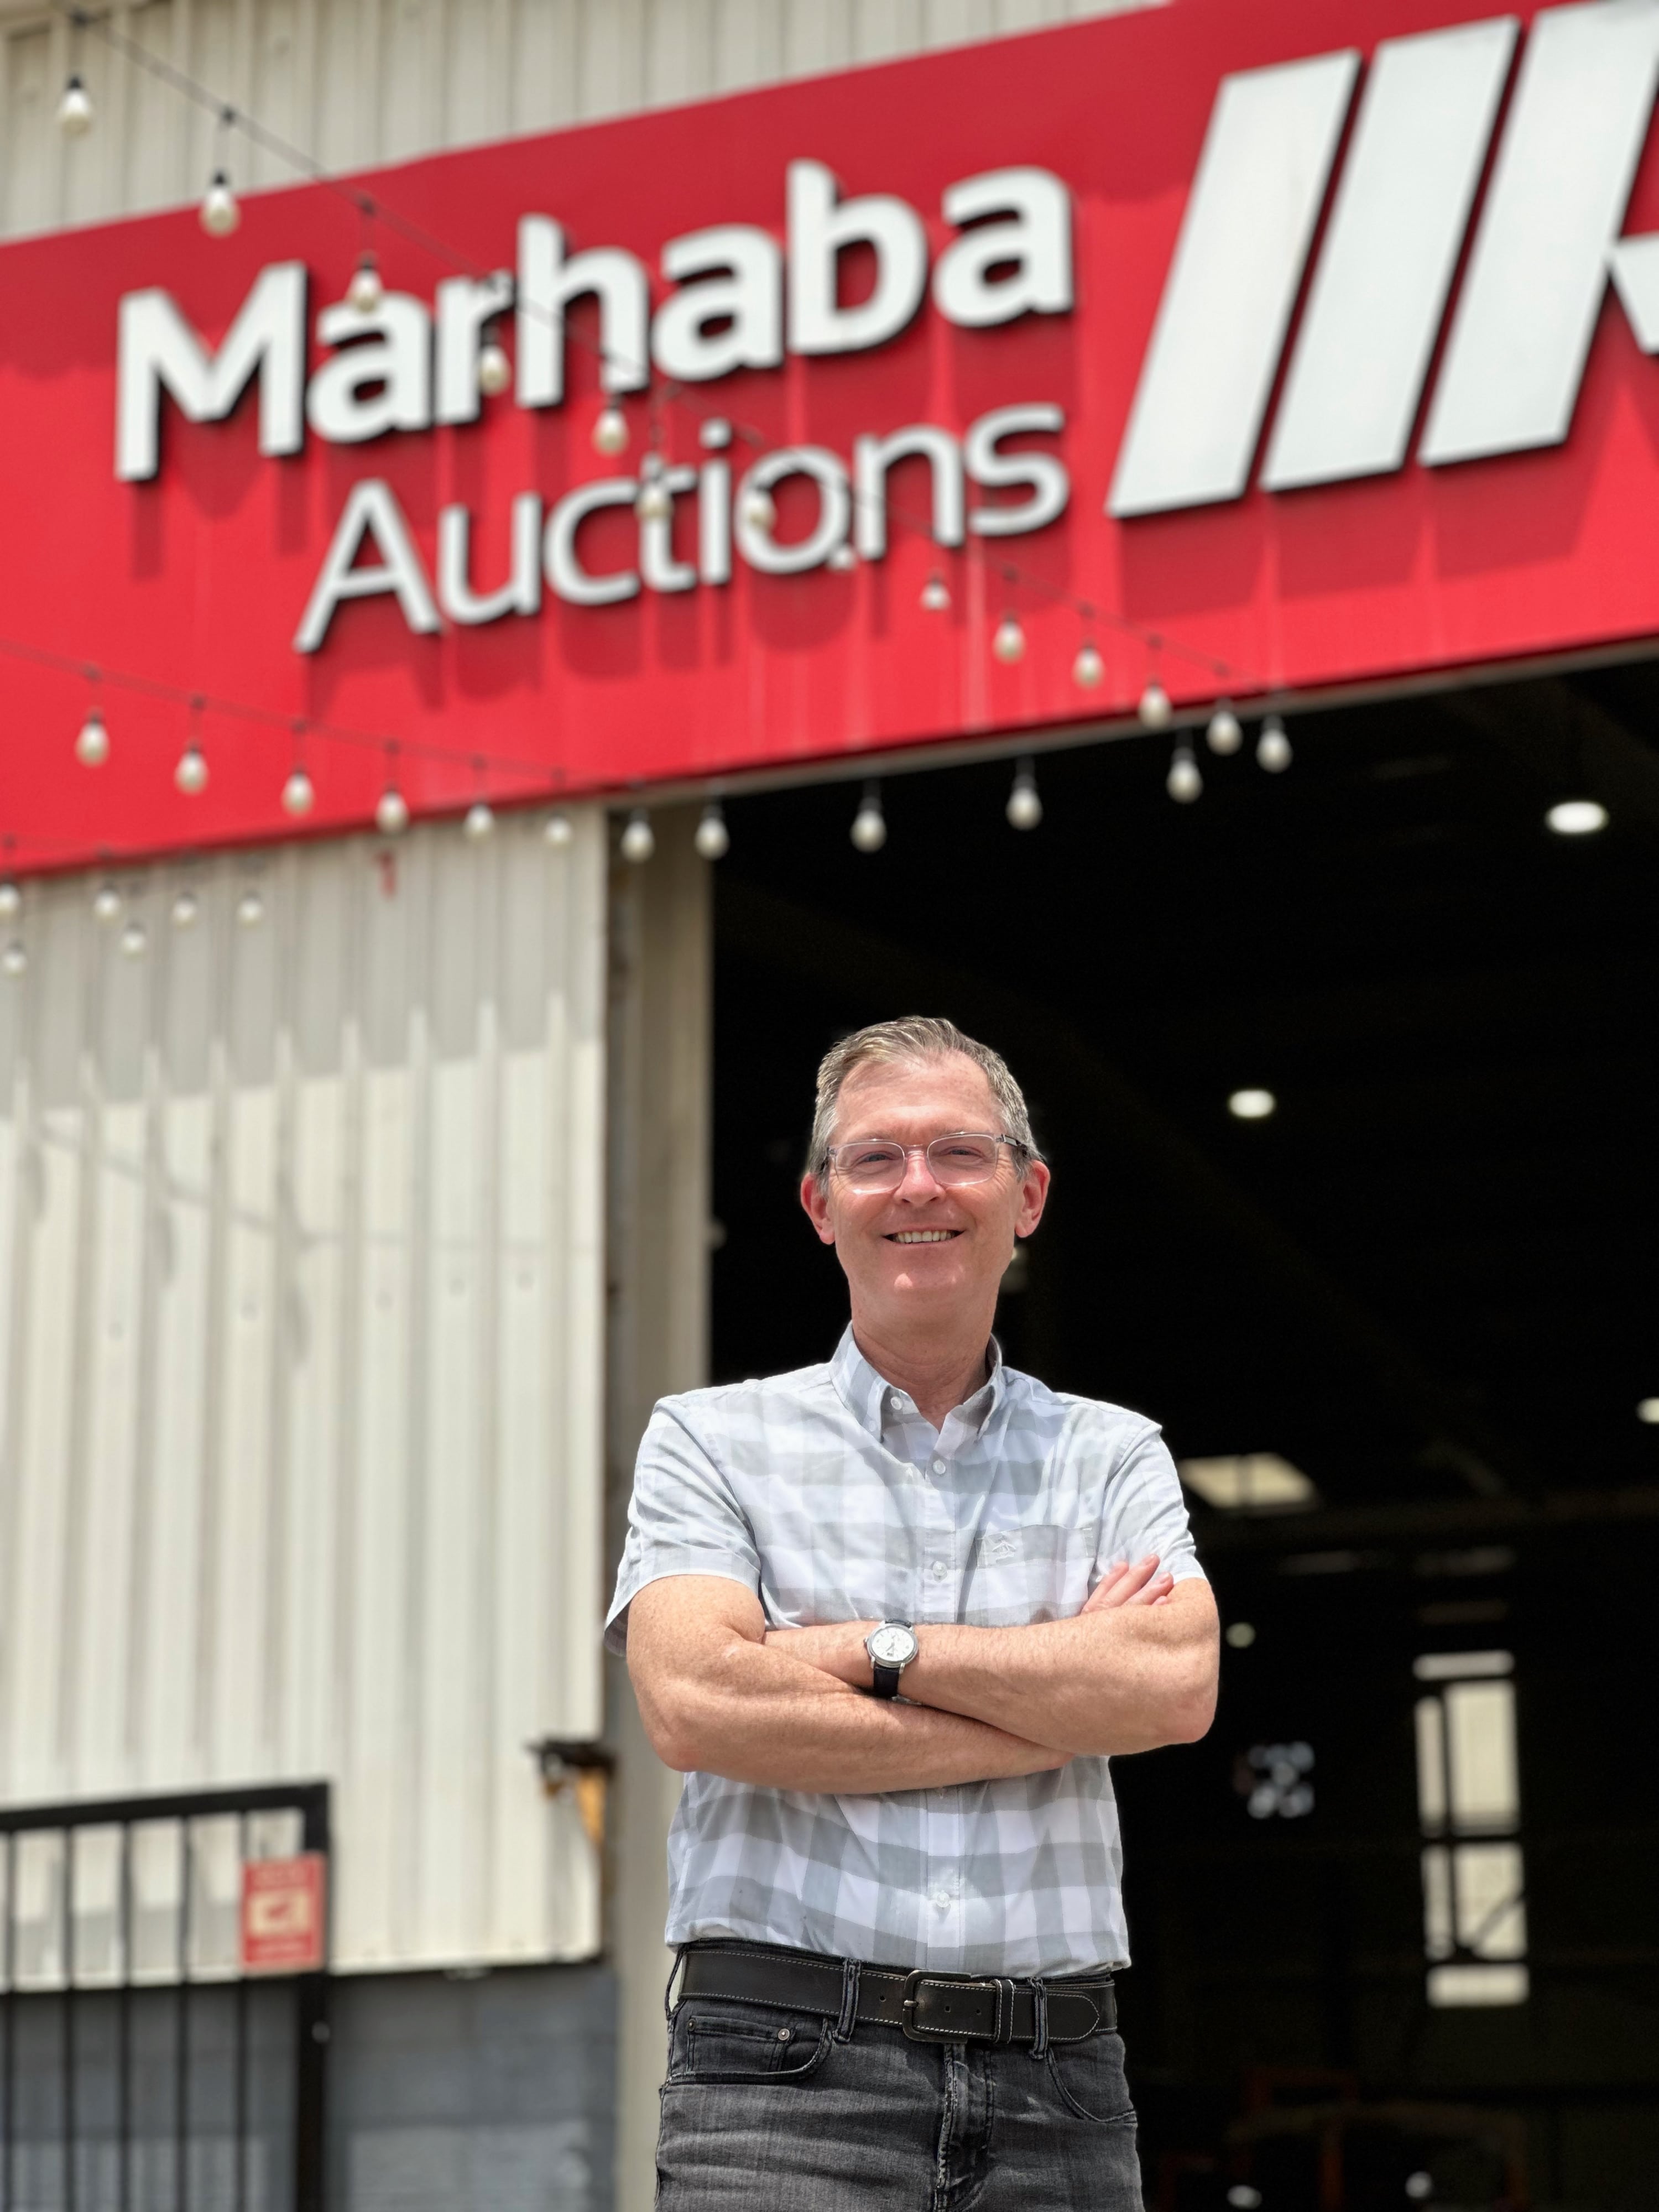 Marhaba Auctions Announces Seasoned Industry Leader as New Chief Operating Officer